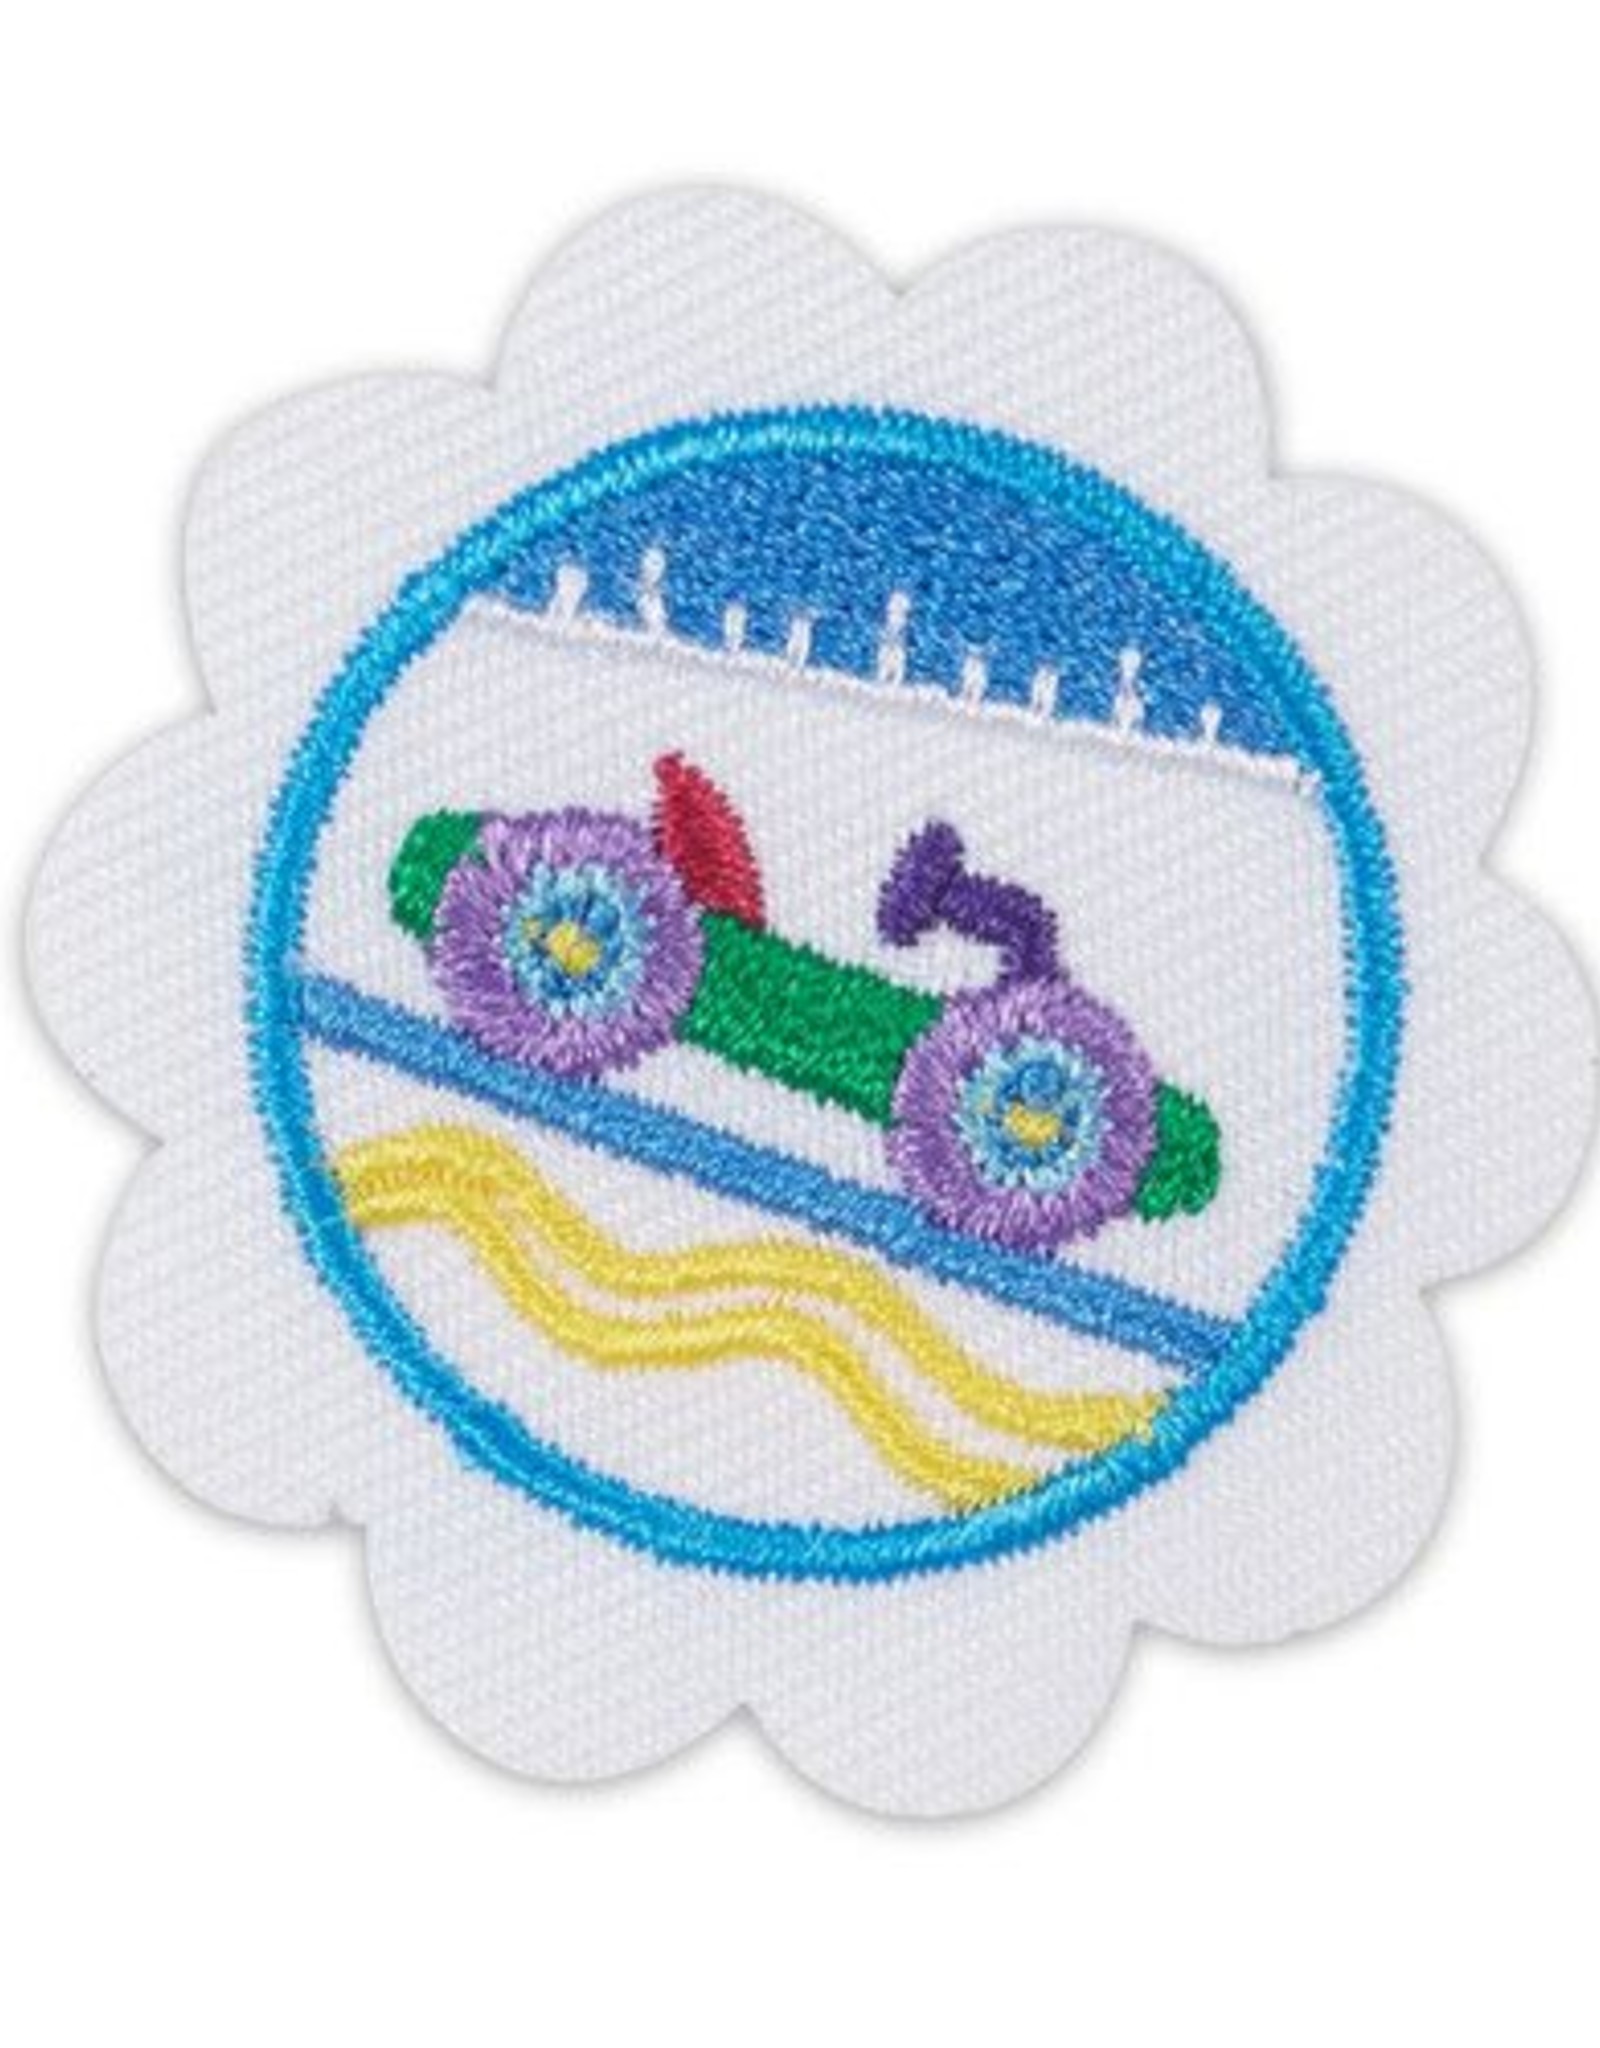 GIRL SCOUTS OF THE USA Daisy Mechanical Engineering: Model Car Design Badge